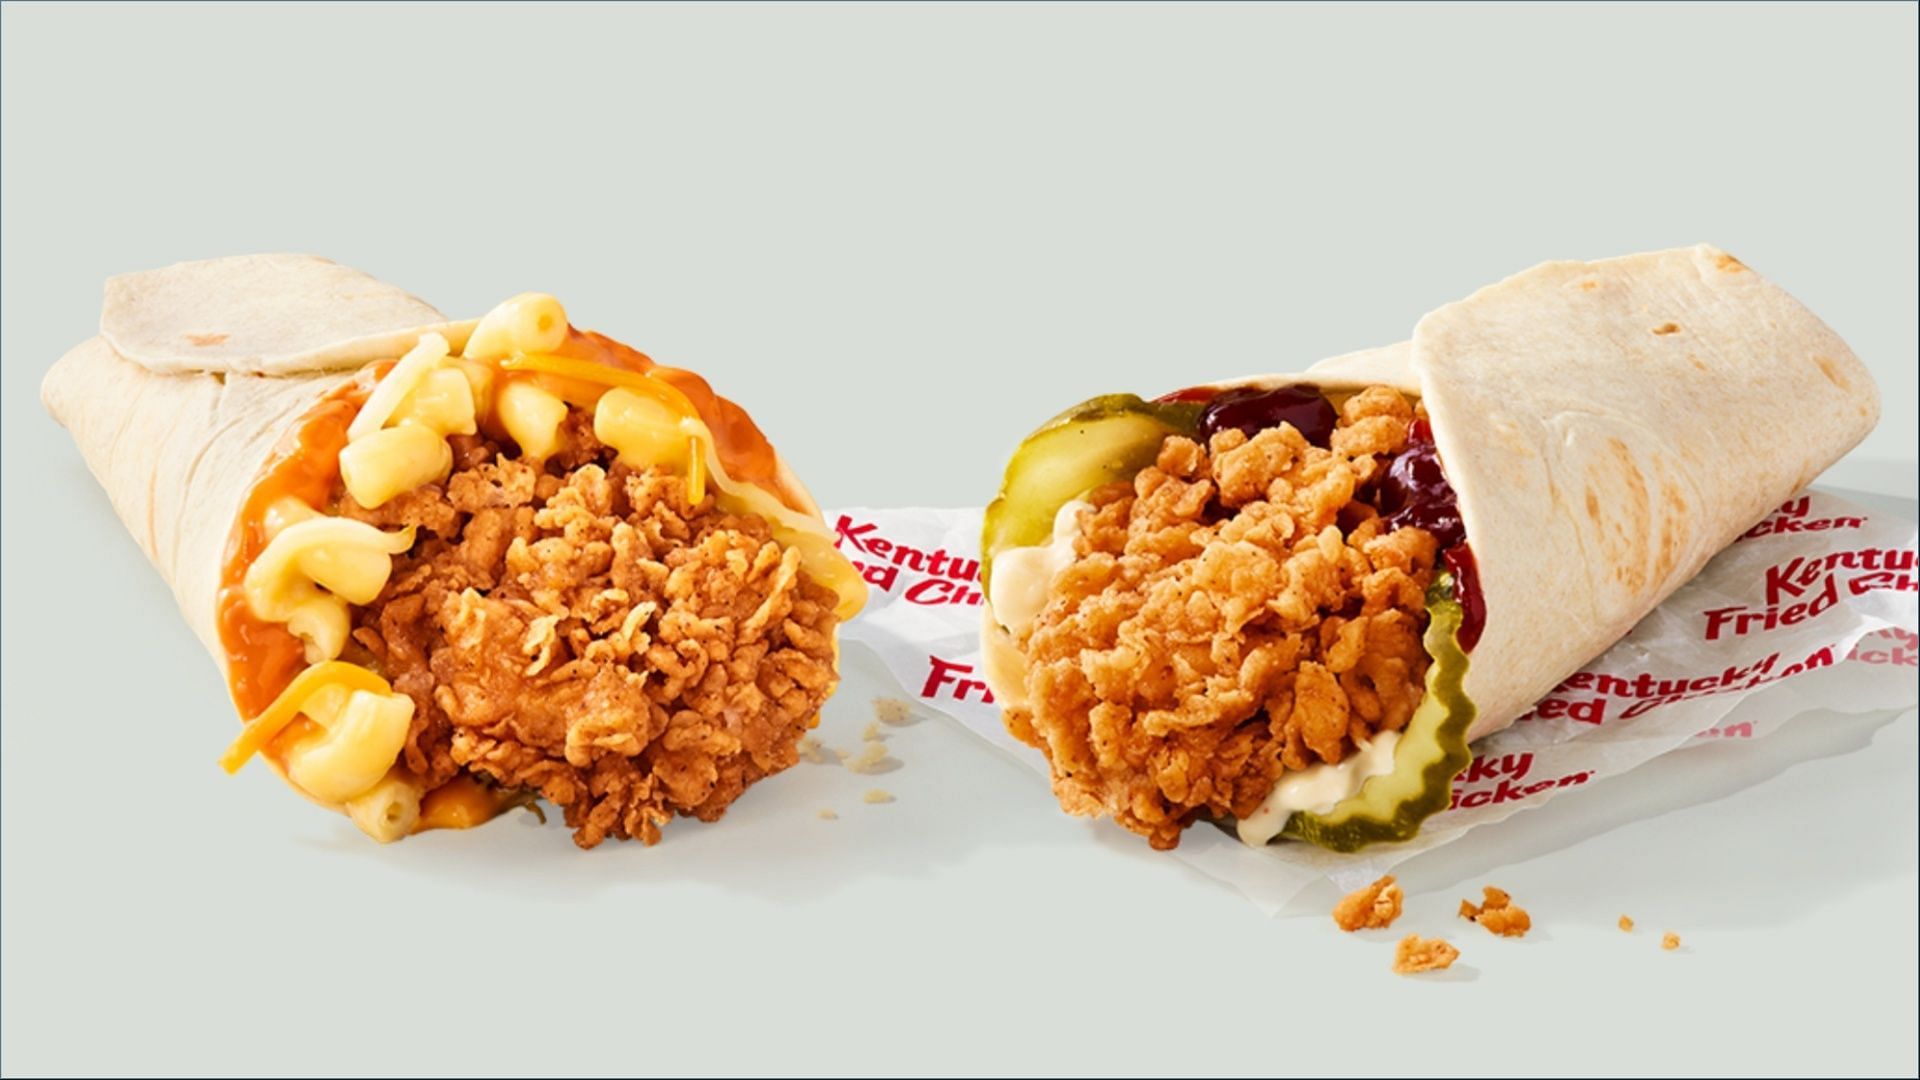 The Spicy Mac &amp; Cheese Wrap and the Honey BBQ Wrap are available under the two for $5 lineup (Image via KFC)